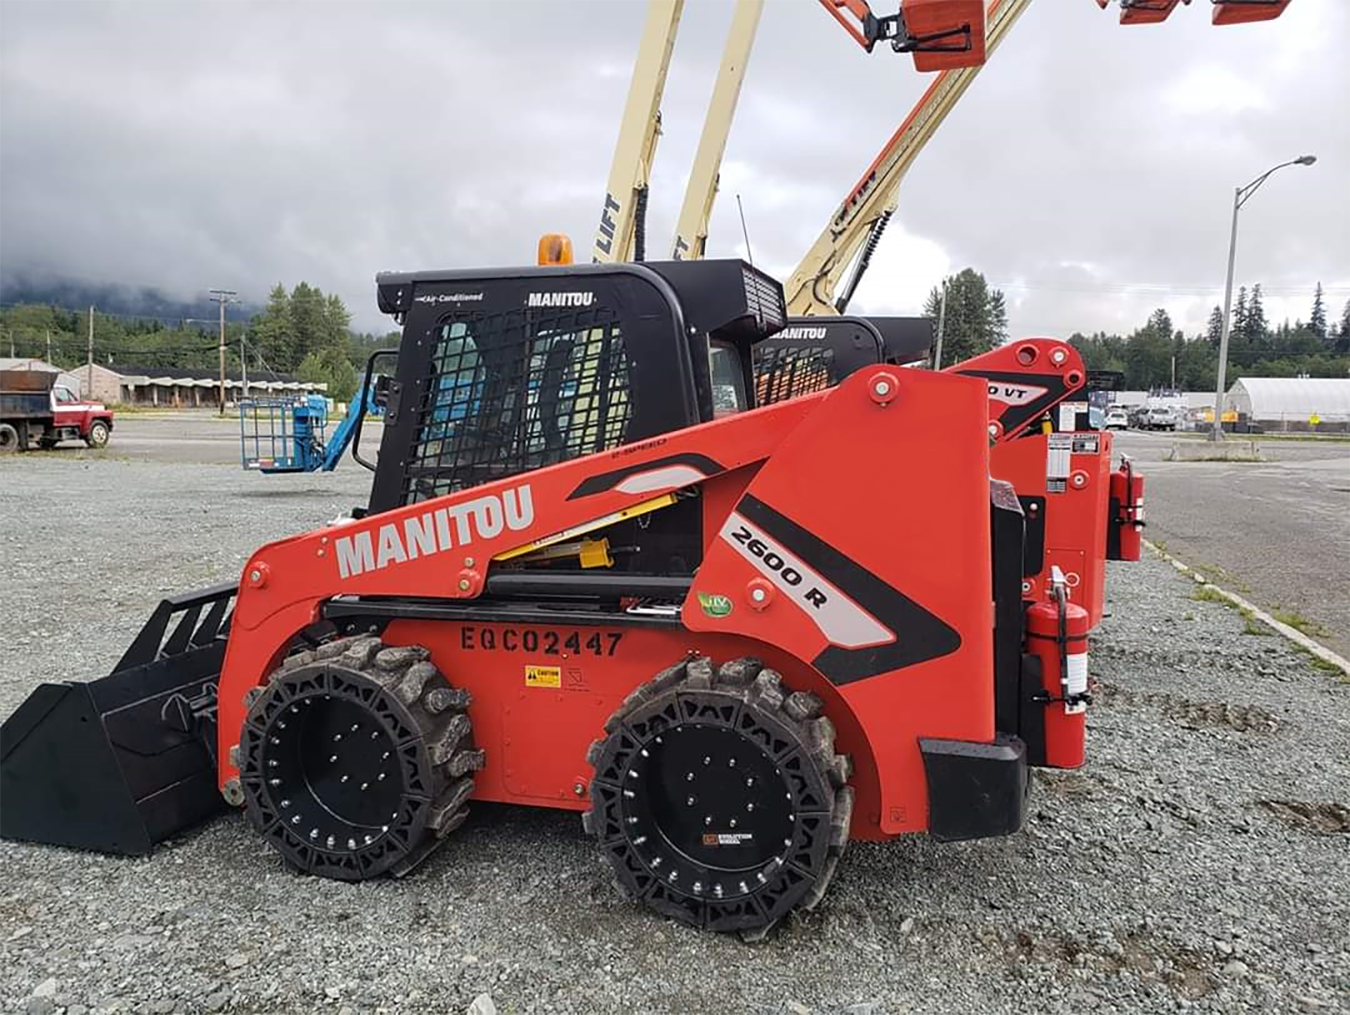 This image is about a Red Manitou Skid Steer using our solid skid steer tires.